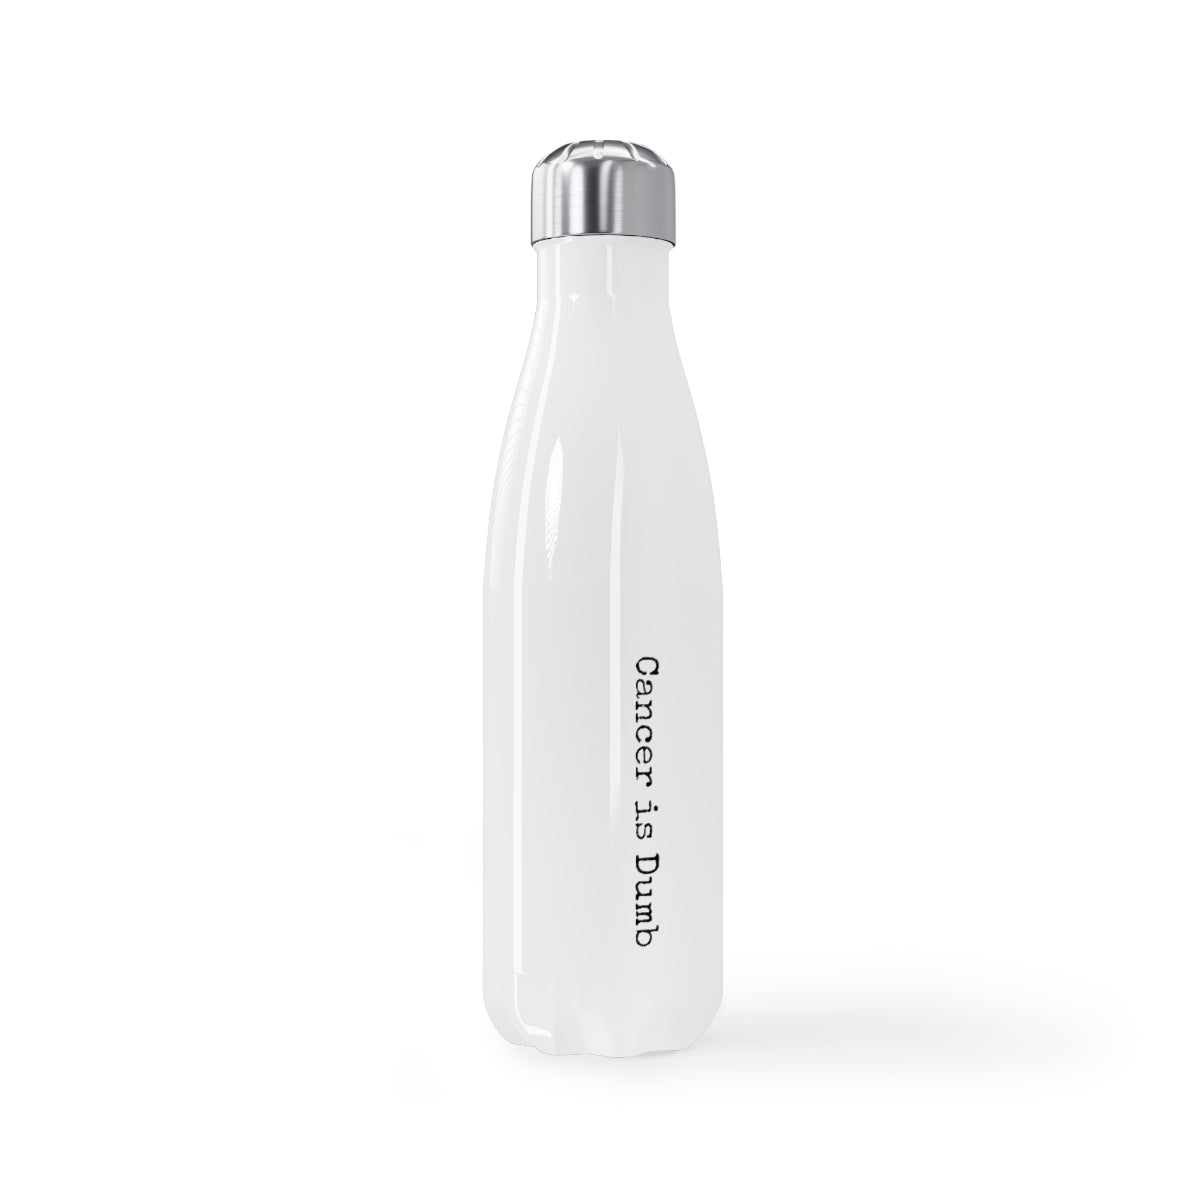 Stainless Steel Water Bottle, 17oz Anti Cancer Cancer is Dumb Survivor Support Humorous Funny